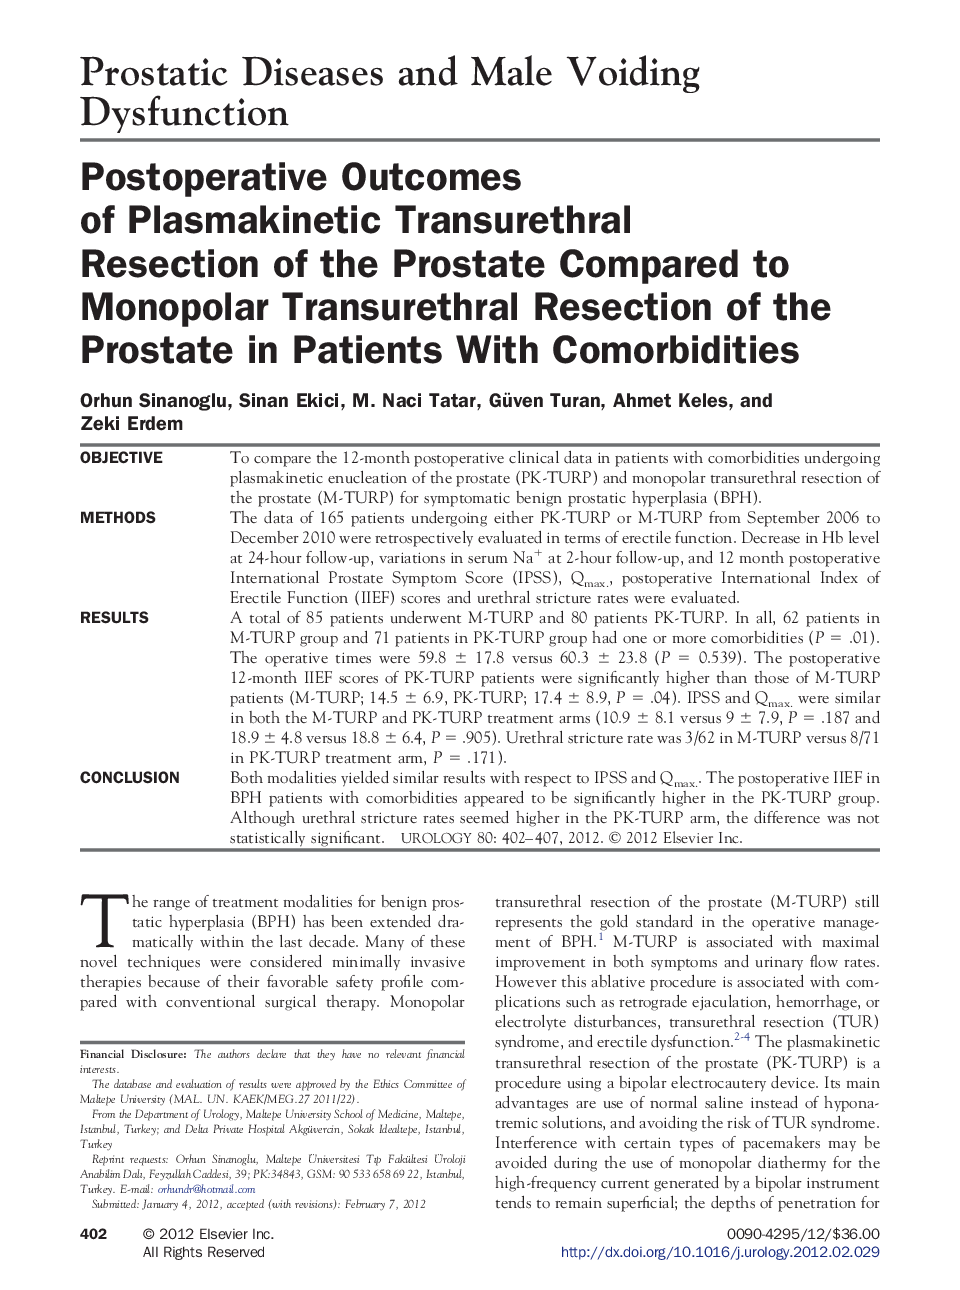 Postoperative Outcomes of Plasmakinetic Transurethral Resection of the Prostate Compared to Monopolar Transurethral Resection of the Prostate in Patients With Comorbidities 